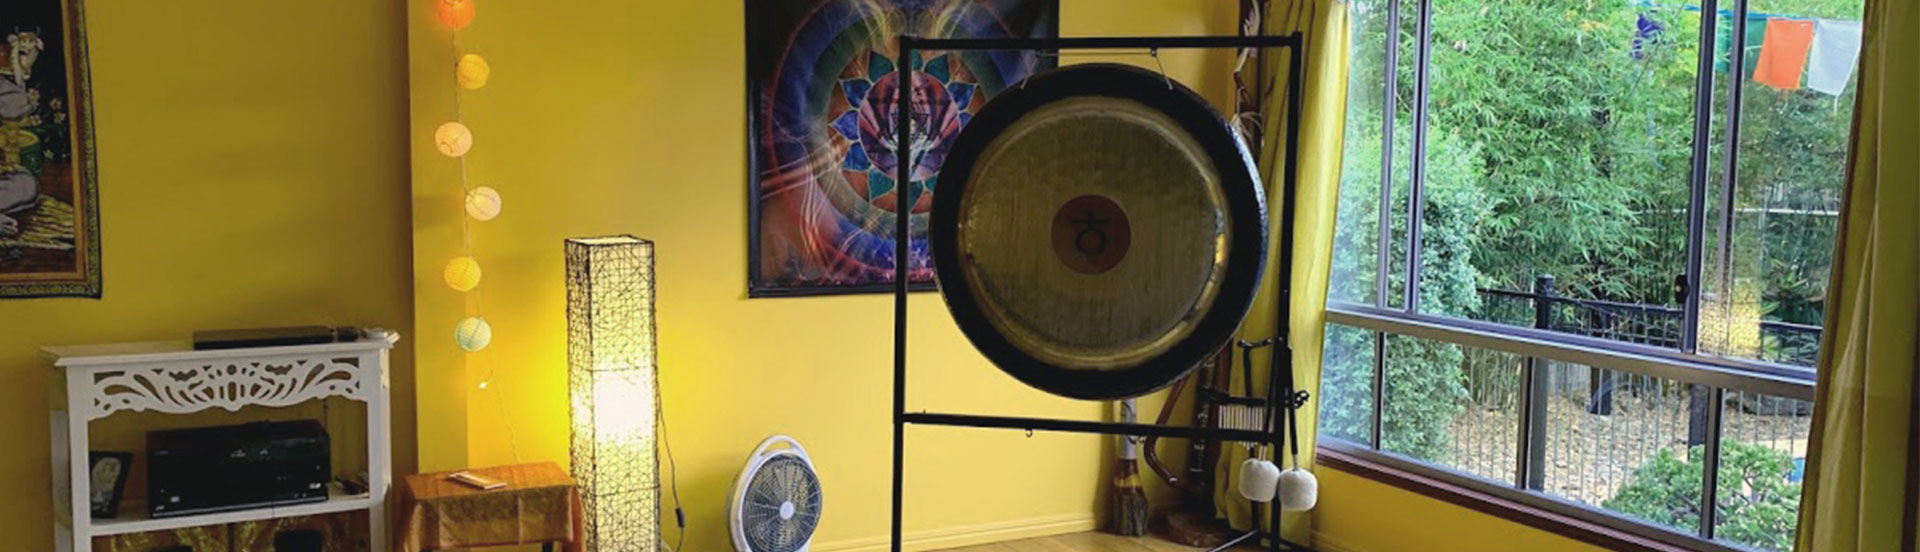 Meditation Gong Therapy